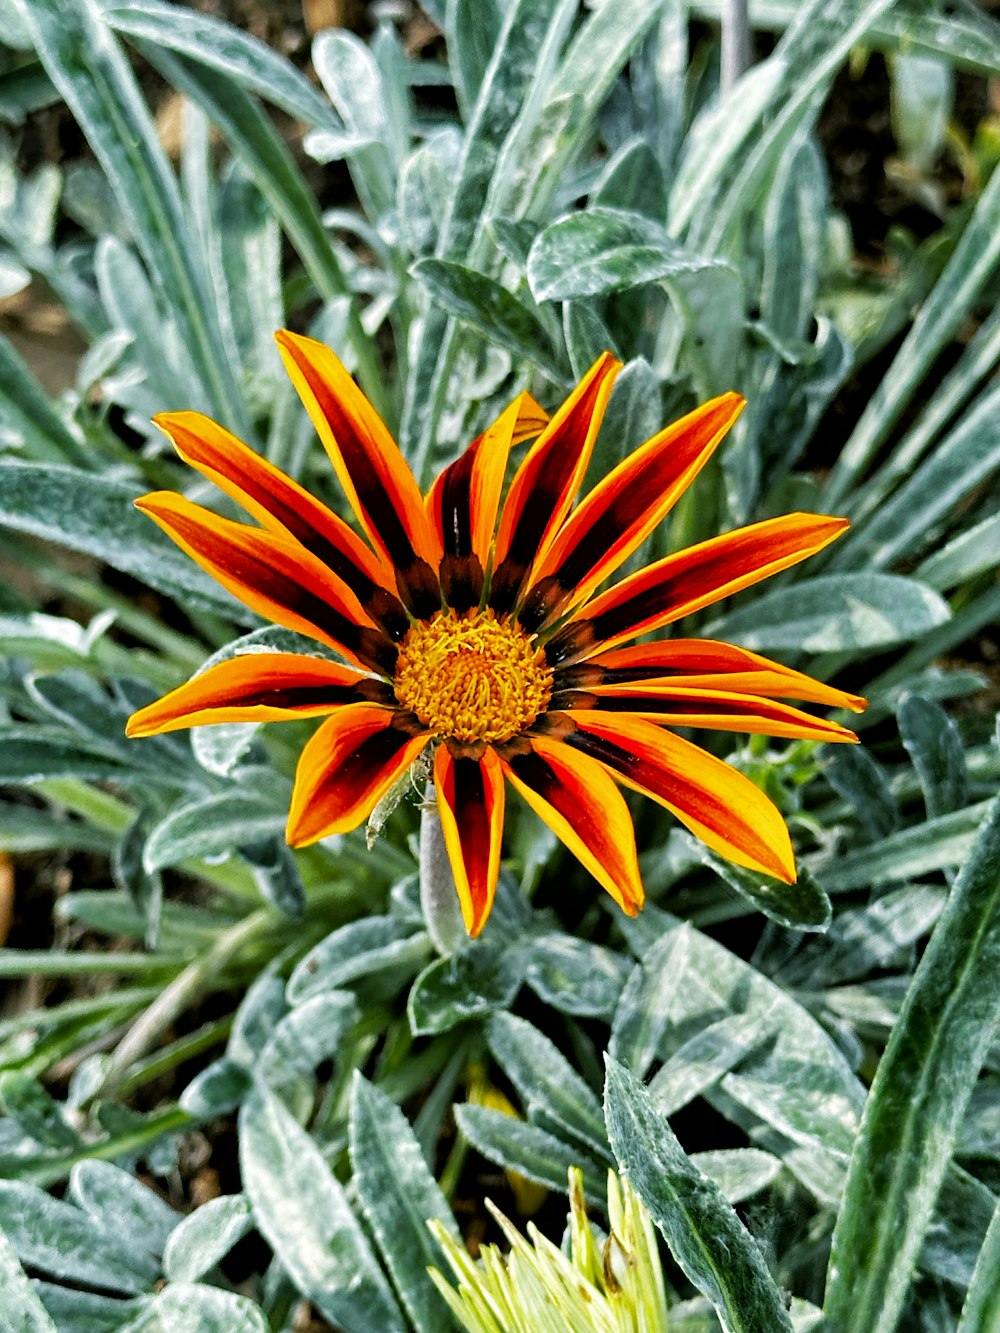 an orange and yellow flower in a garden